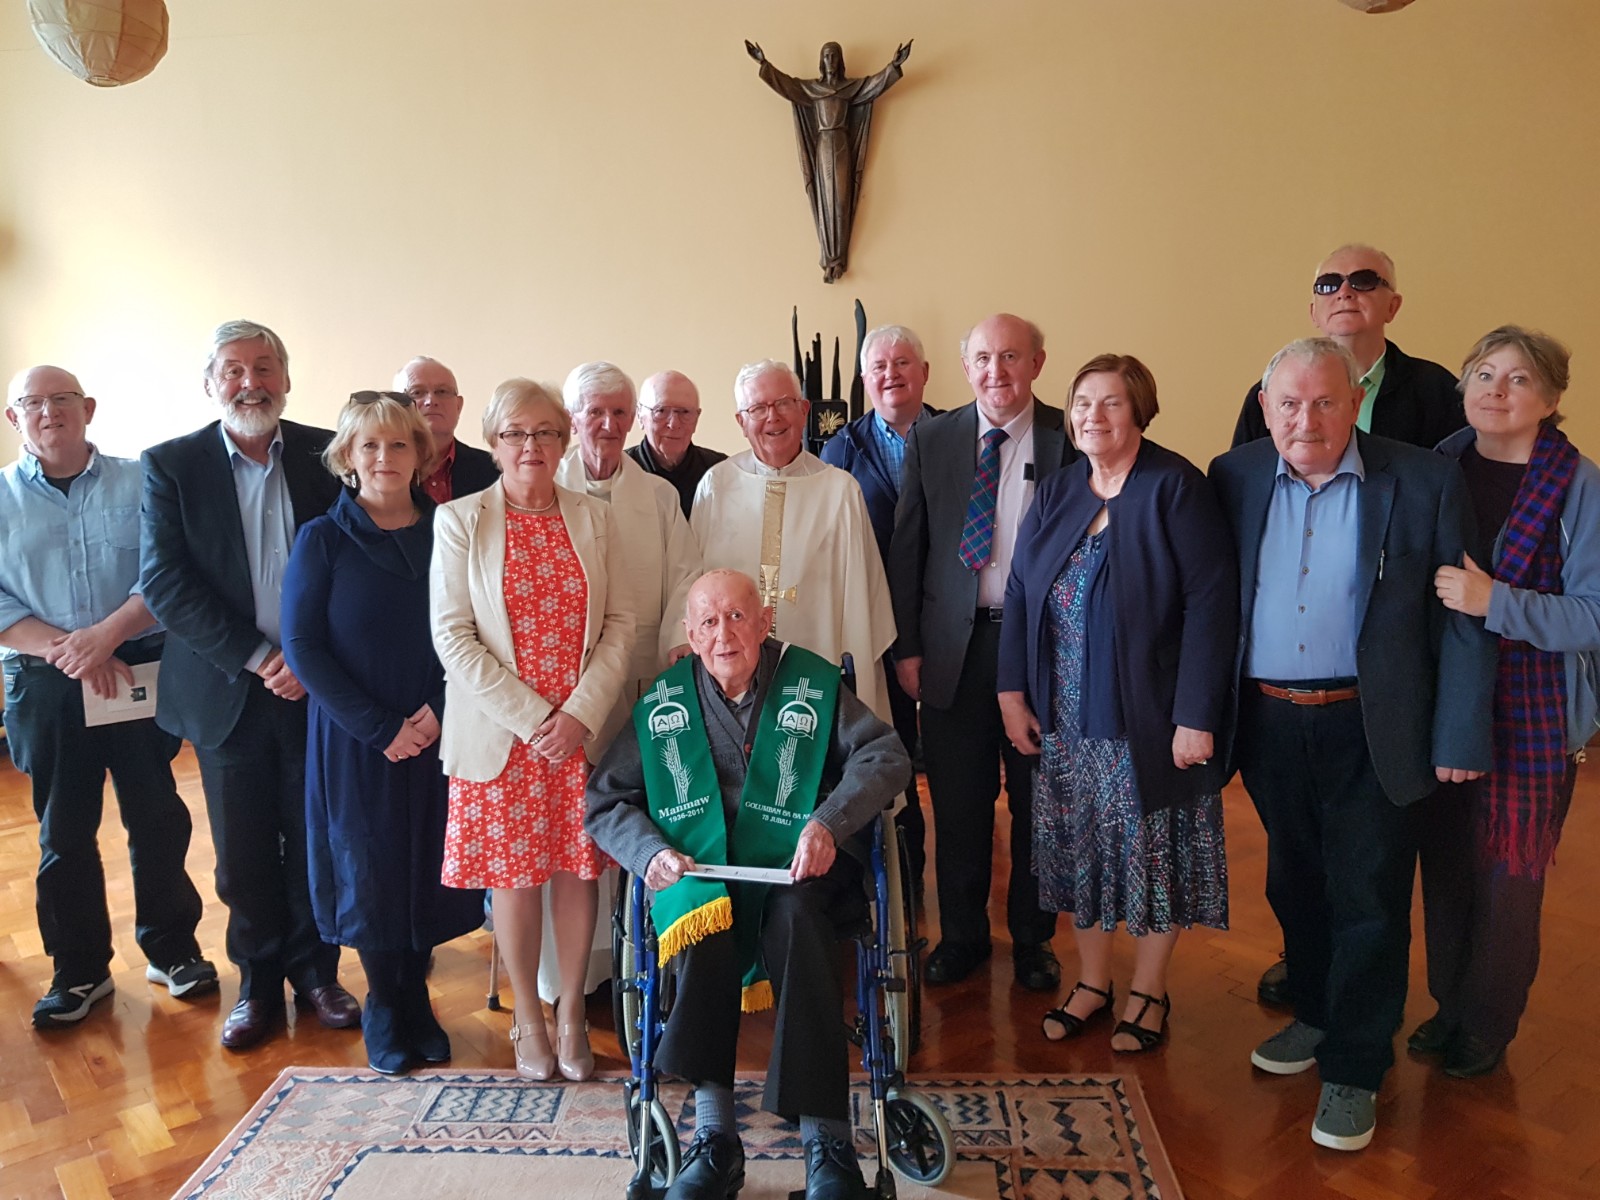 Family of Fr James Fitzpatrick gather to remember his mission